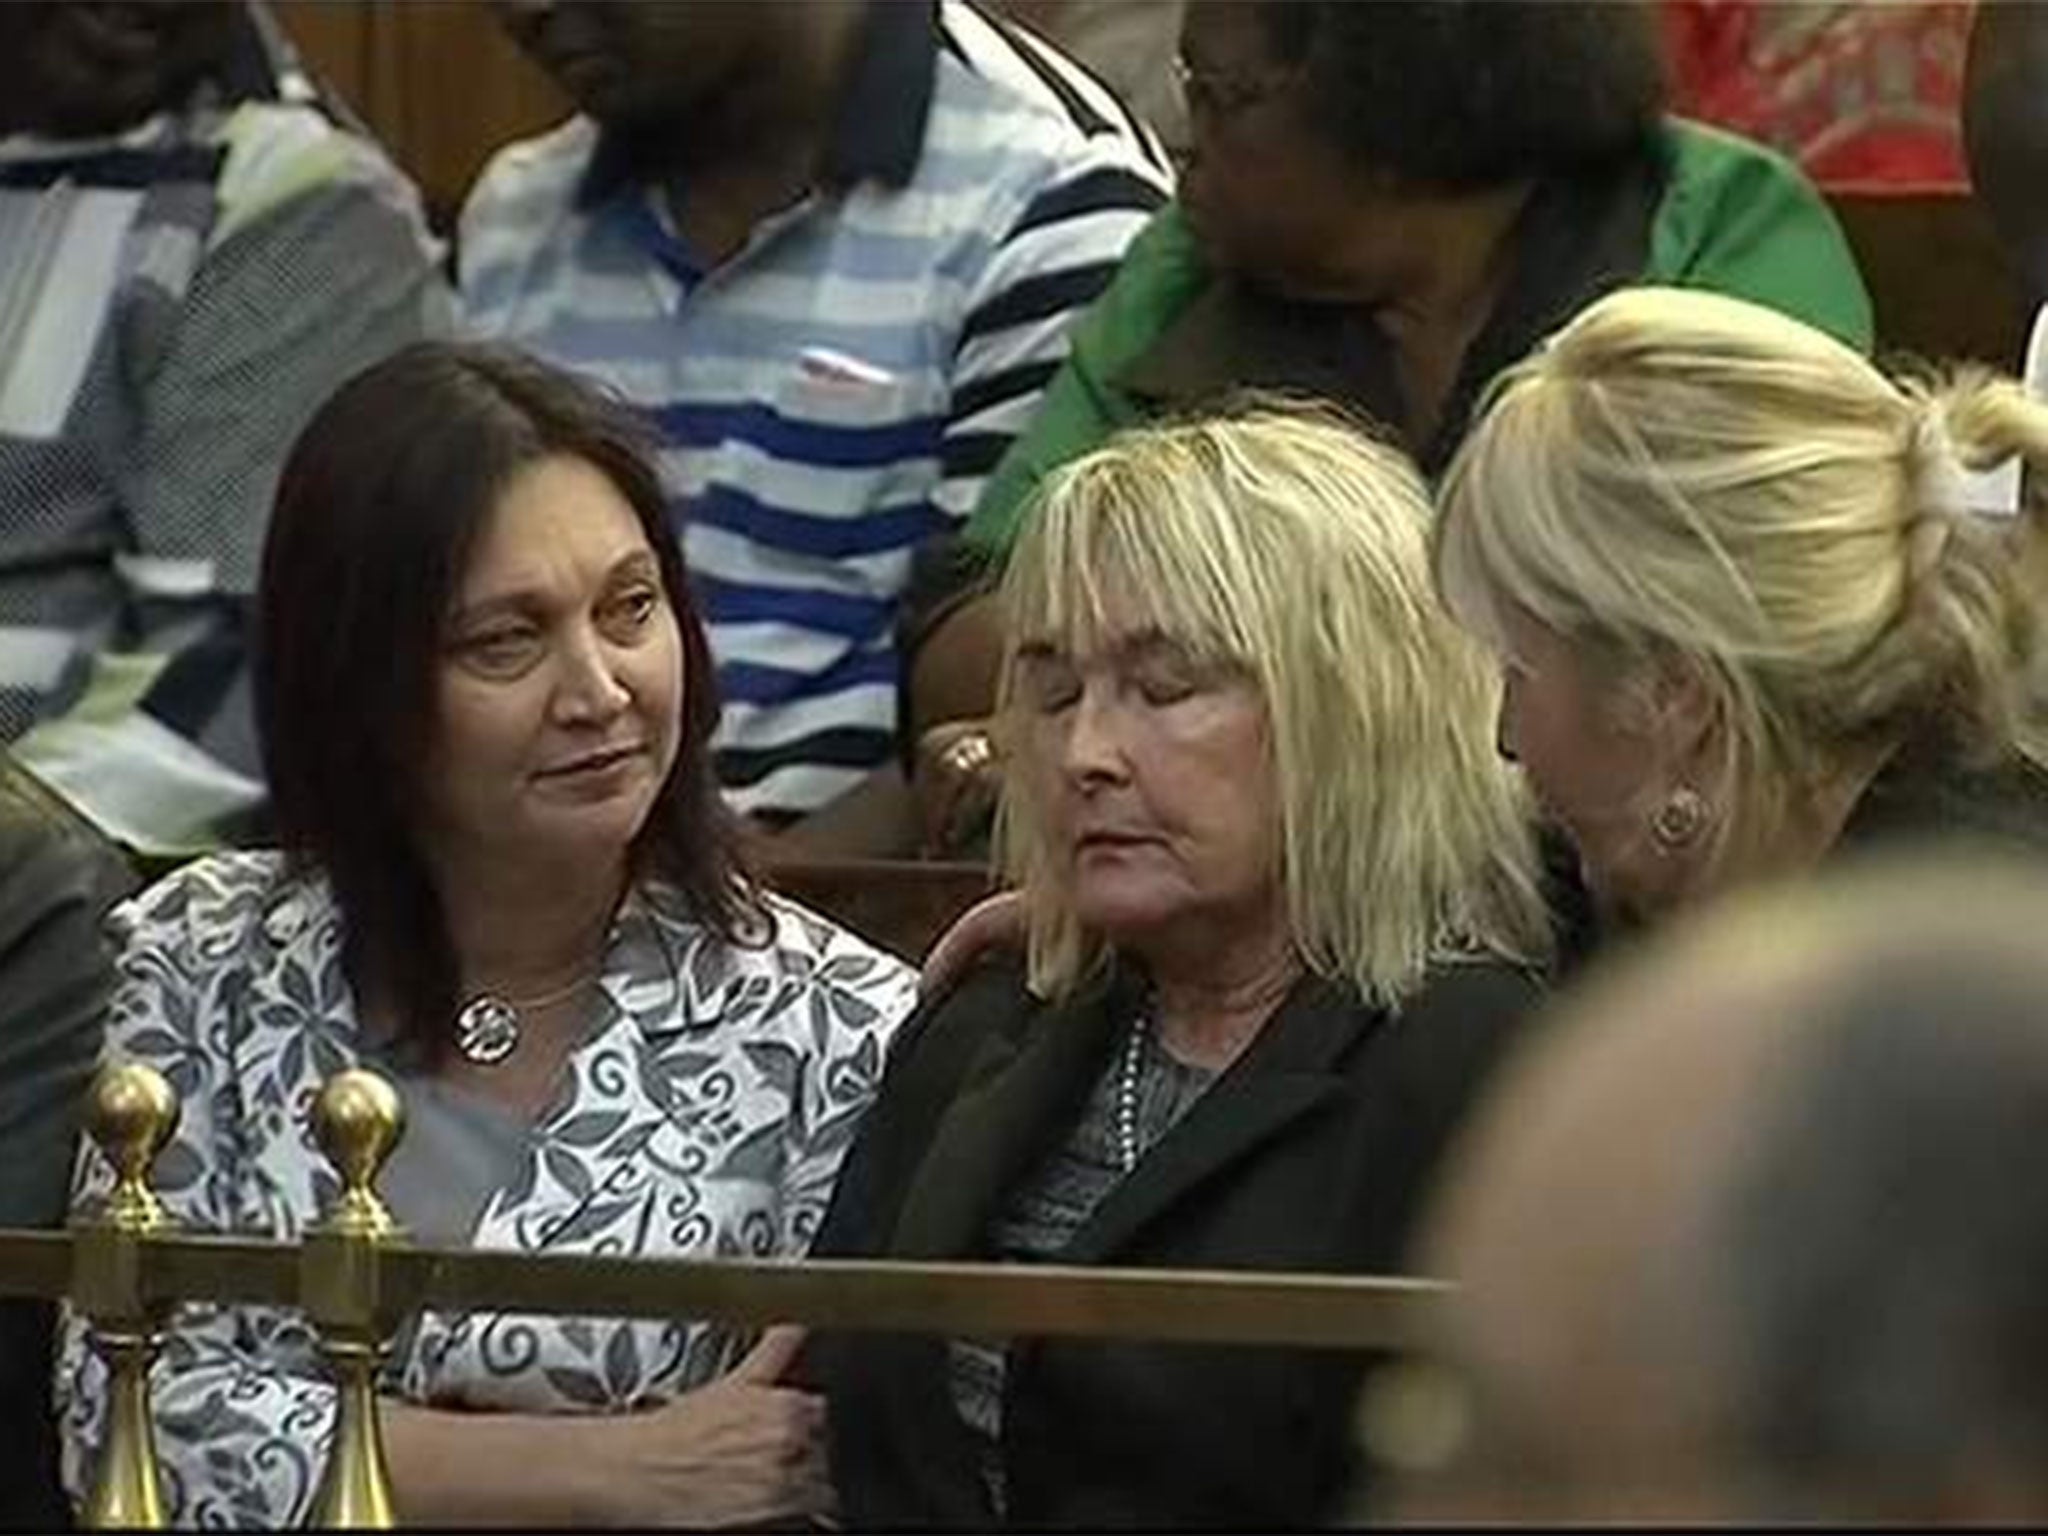 June Steenkamp, Reeva's mother, reacts as the verdict is read out